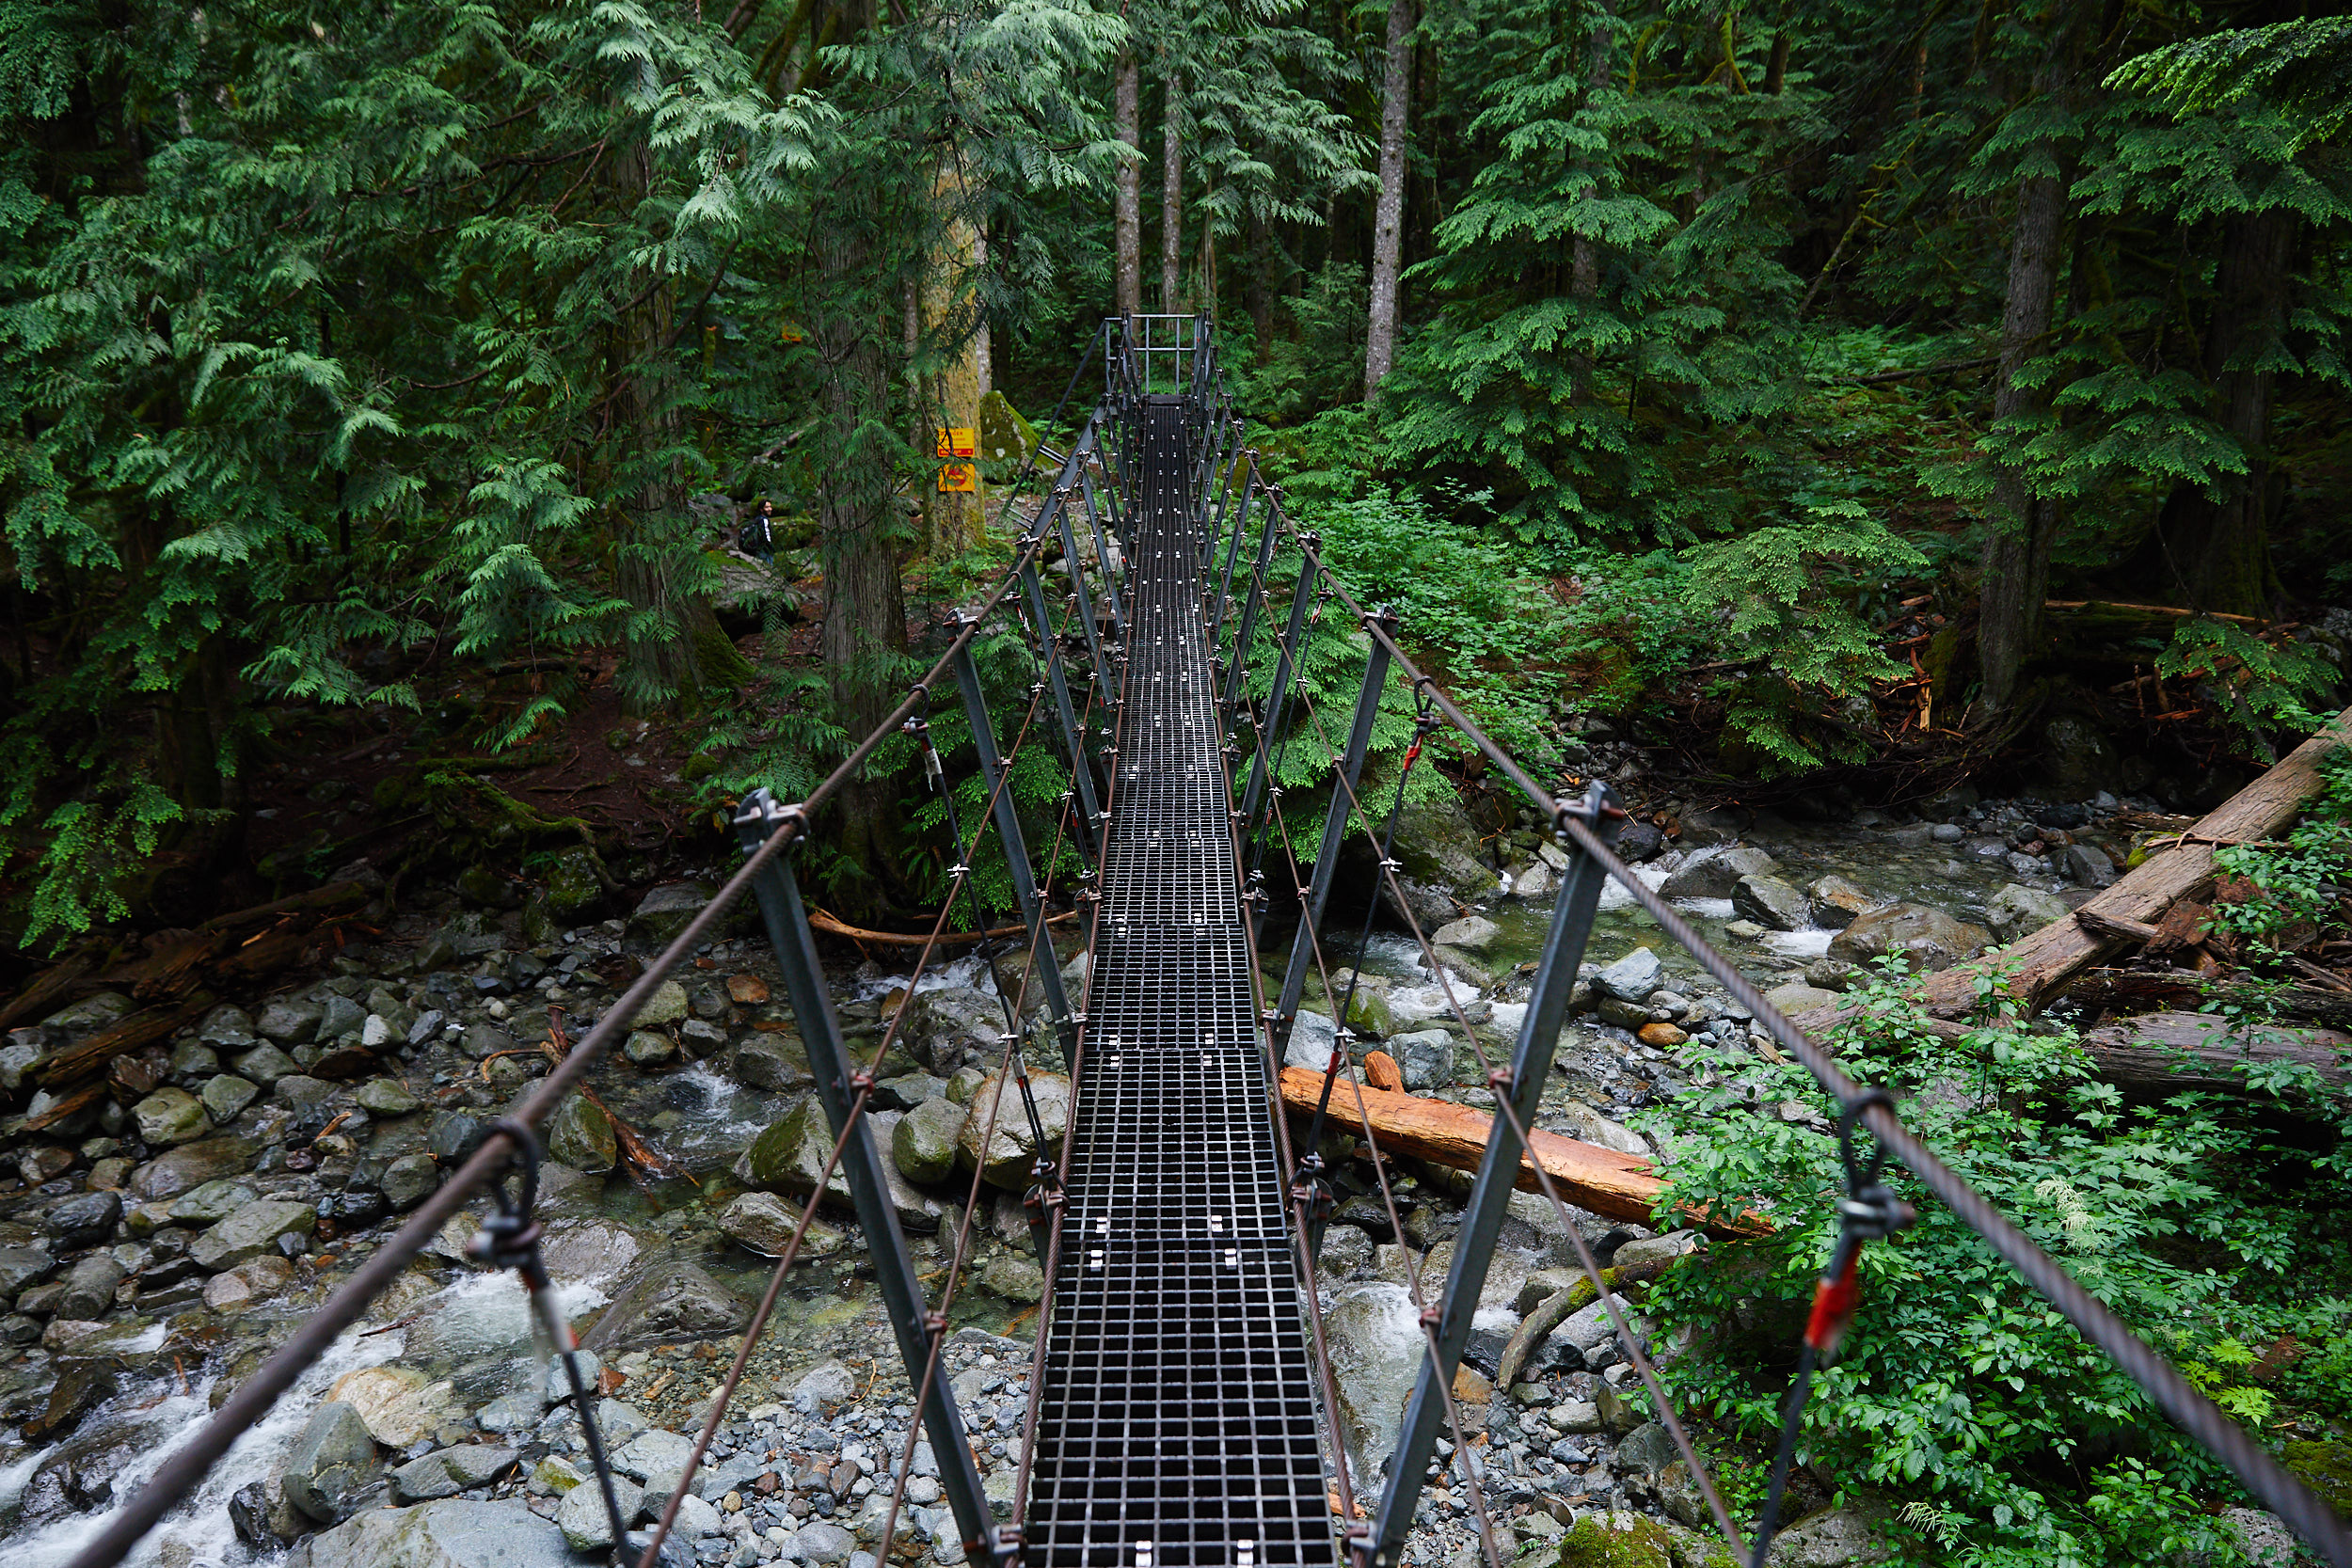  After the waterfall, you cross a wire bridge and continue into the valley. 